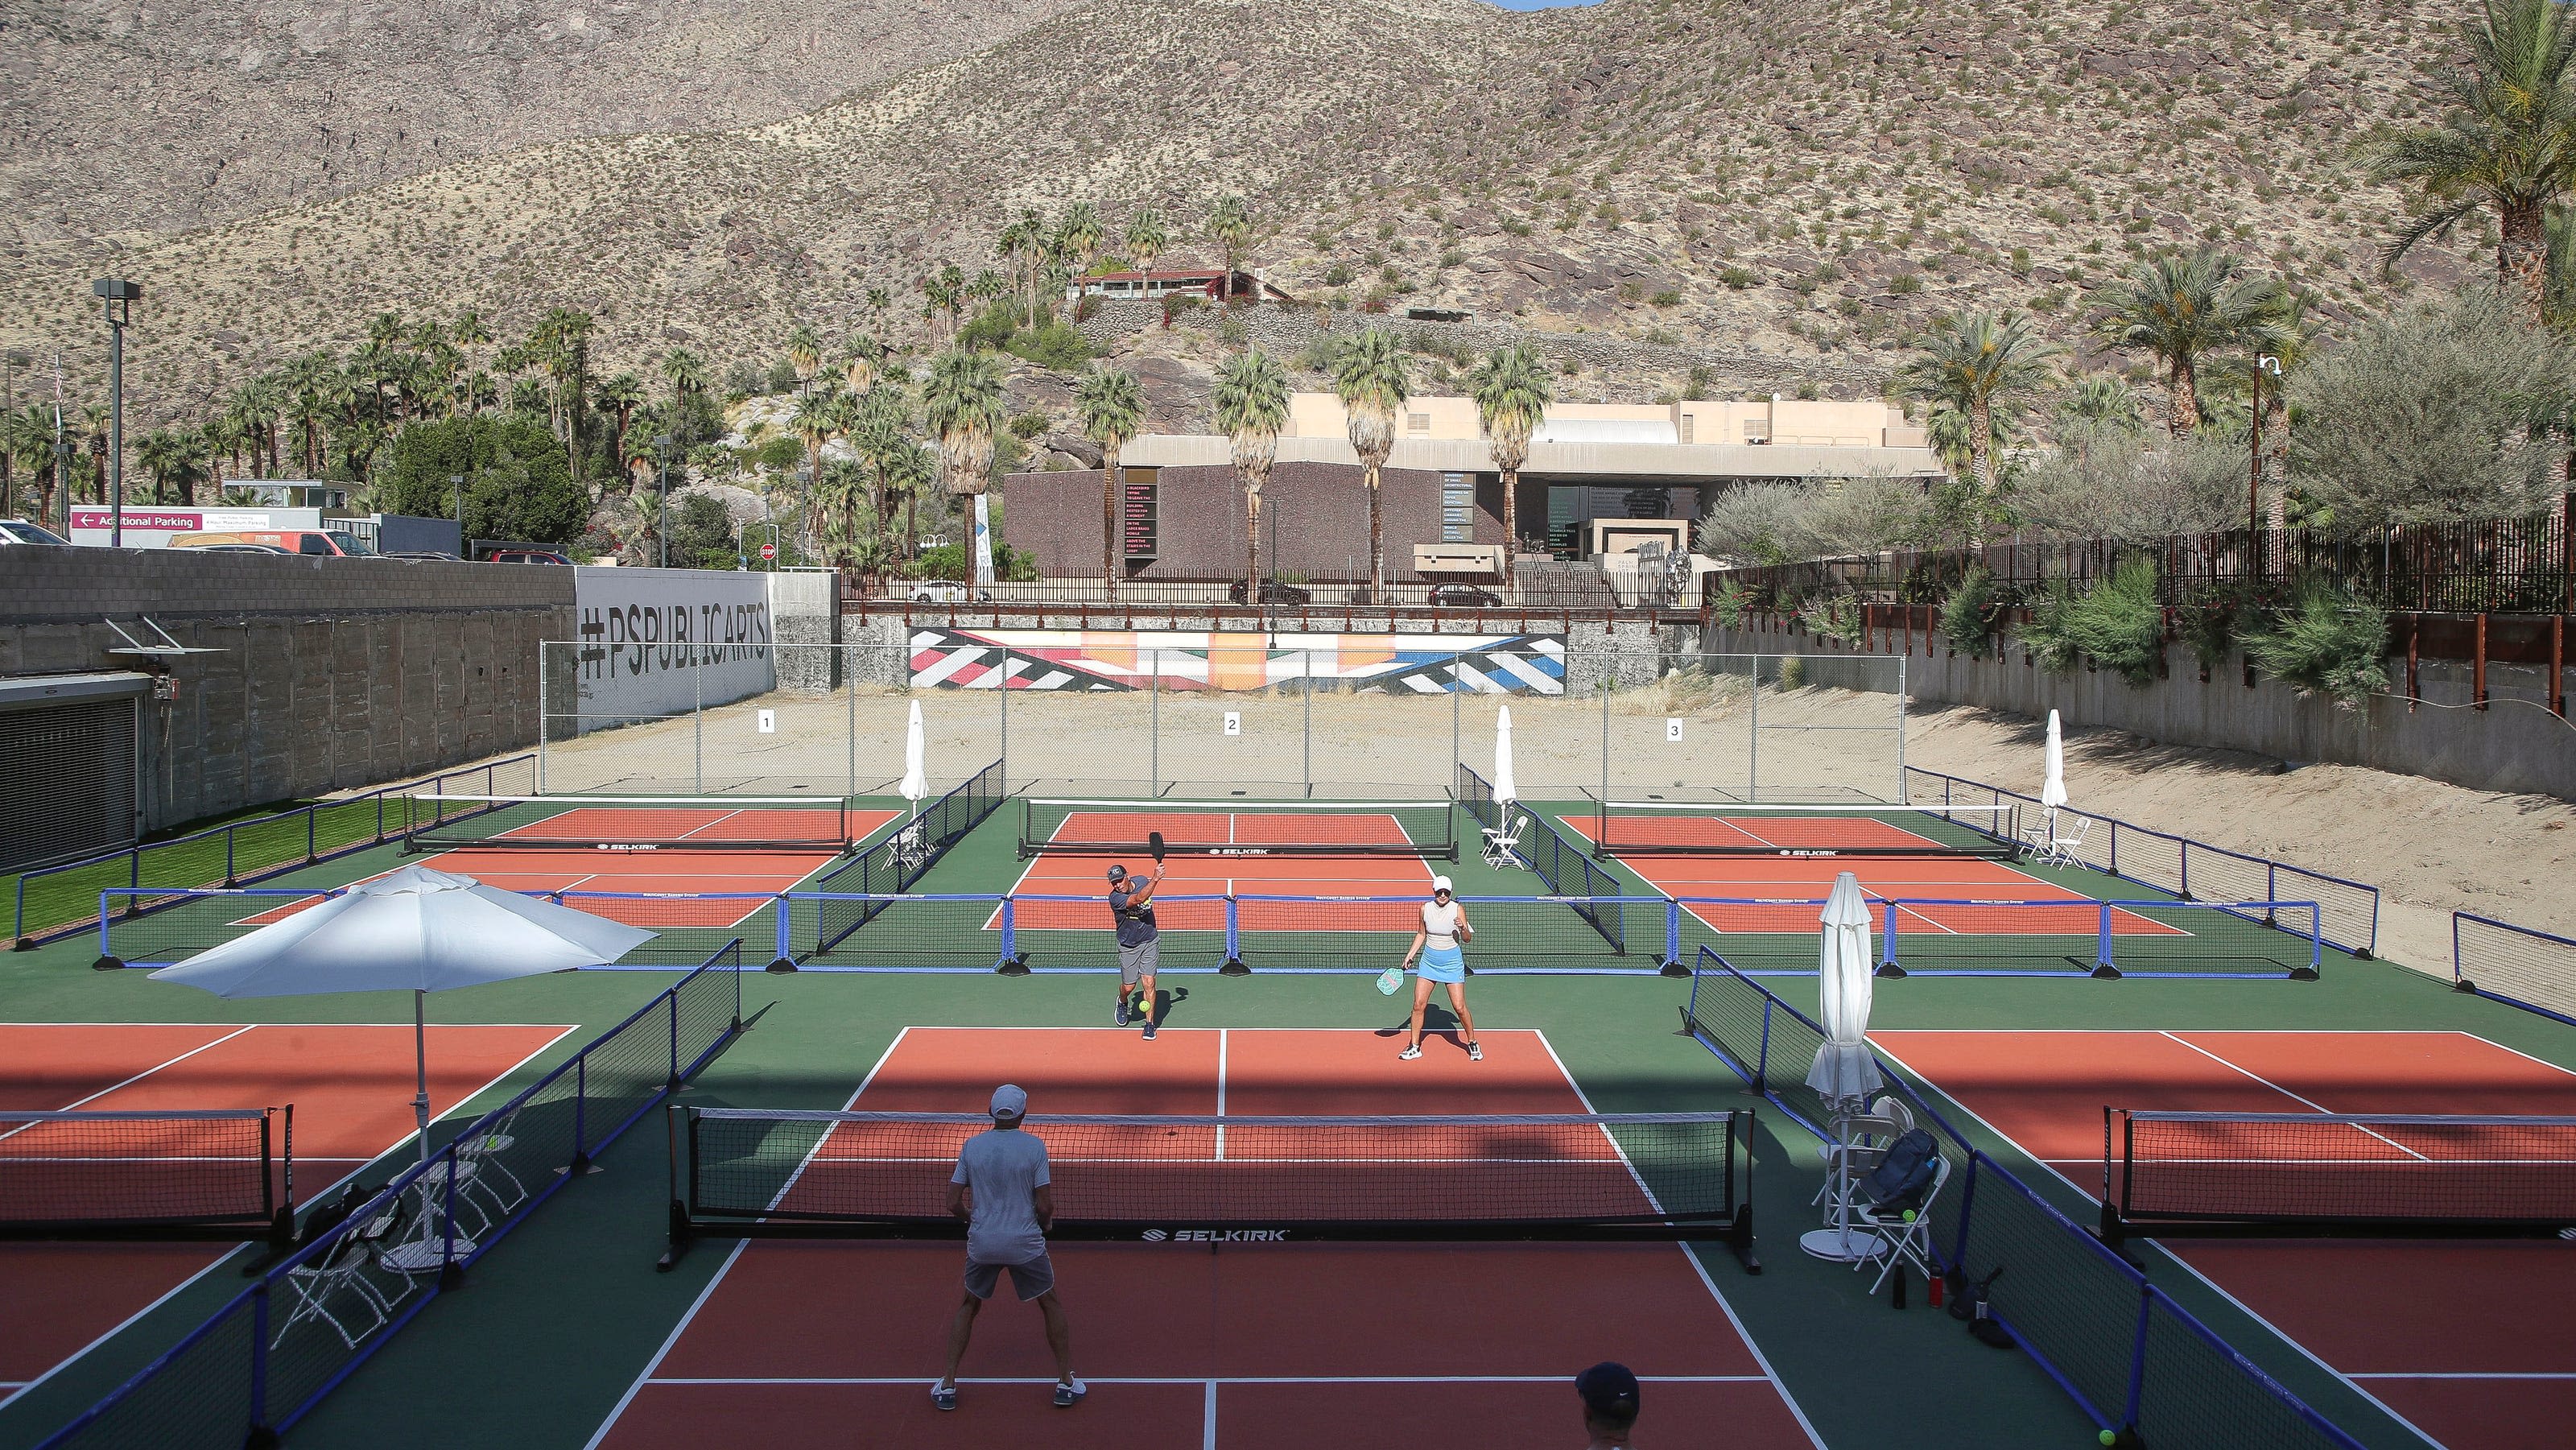 What makes for a great pickleball venue?